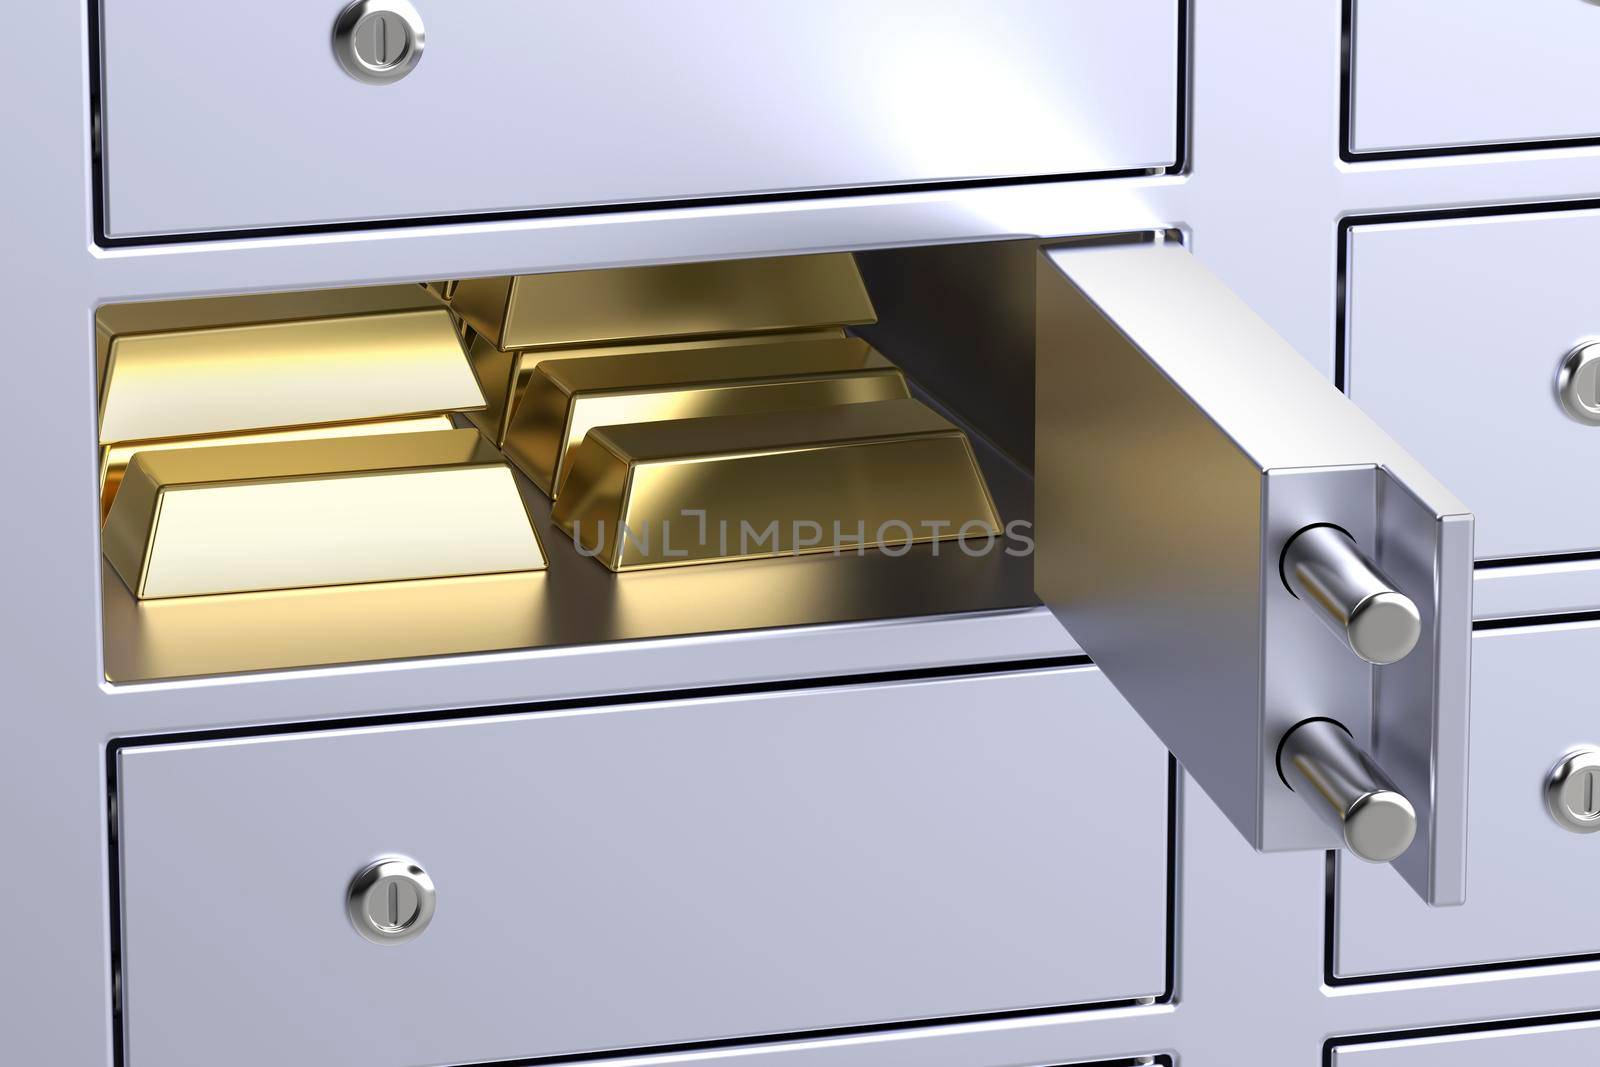 Gold bars in a bank safety deposit box by magraphics